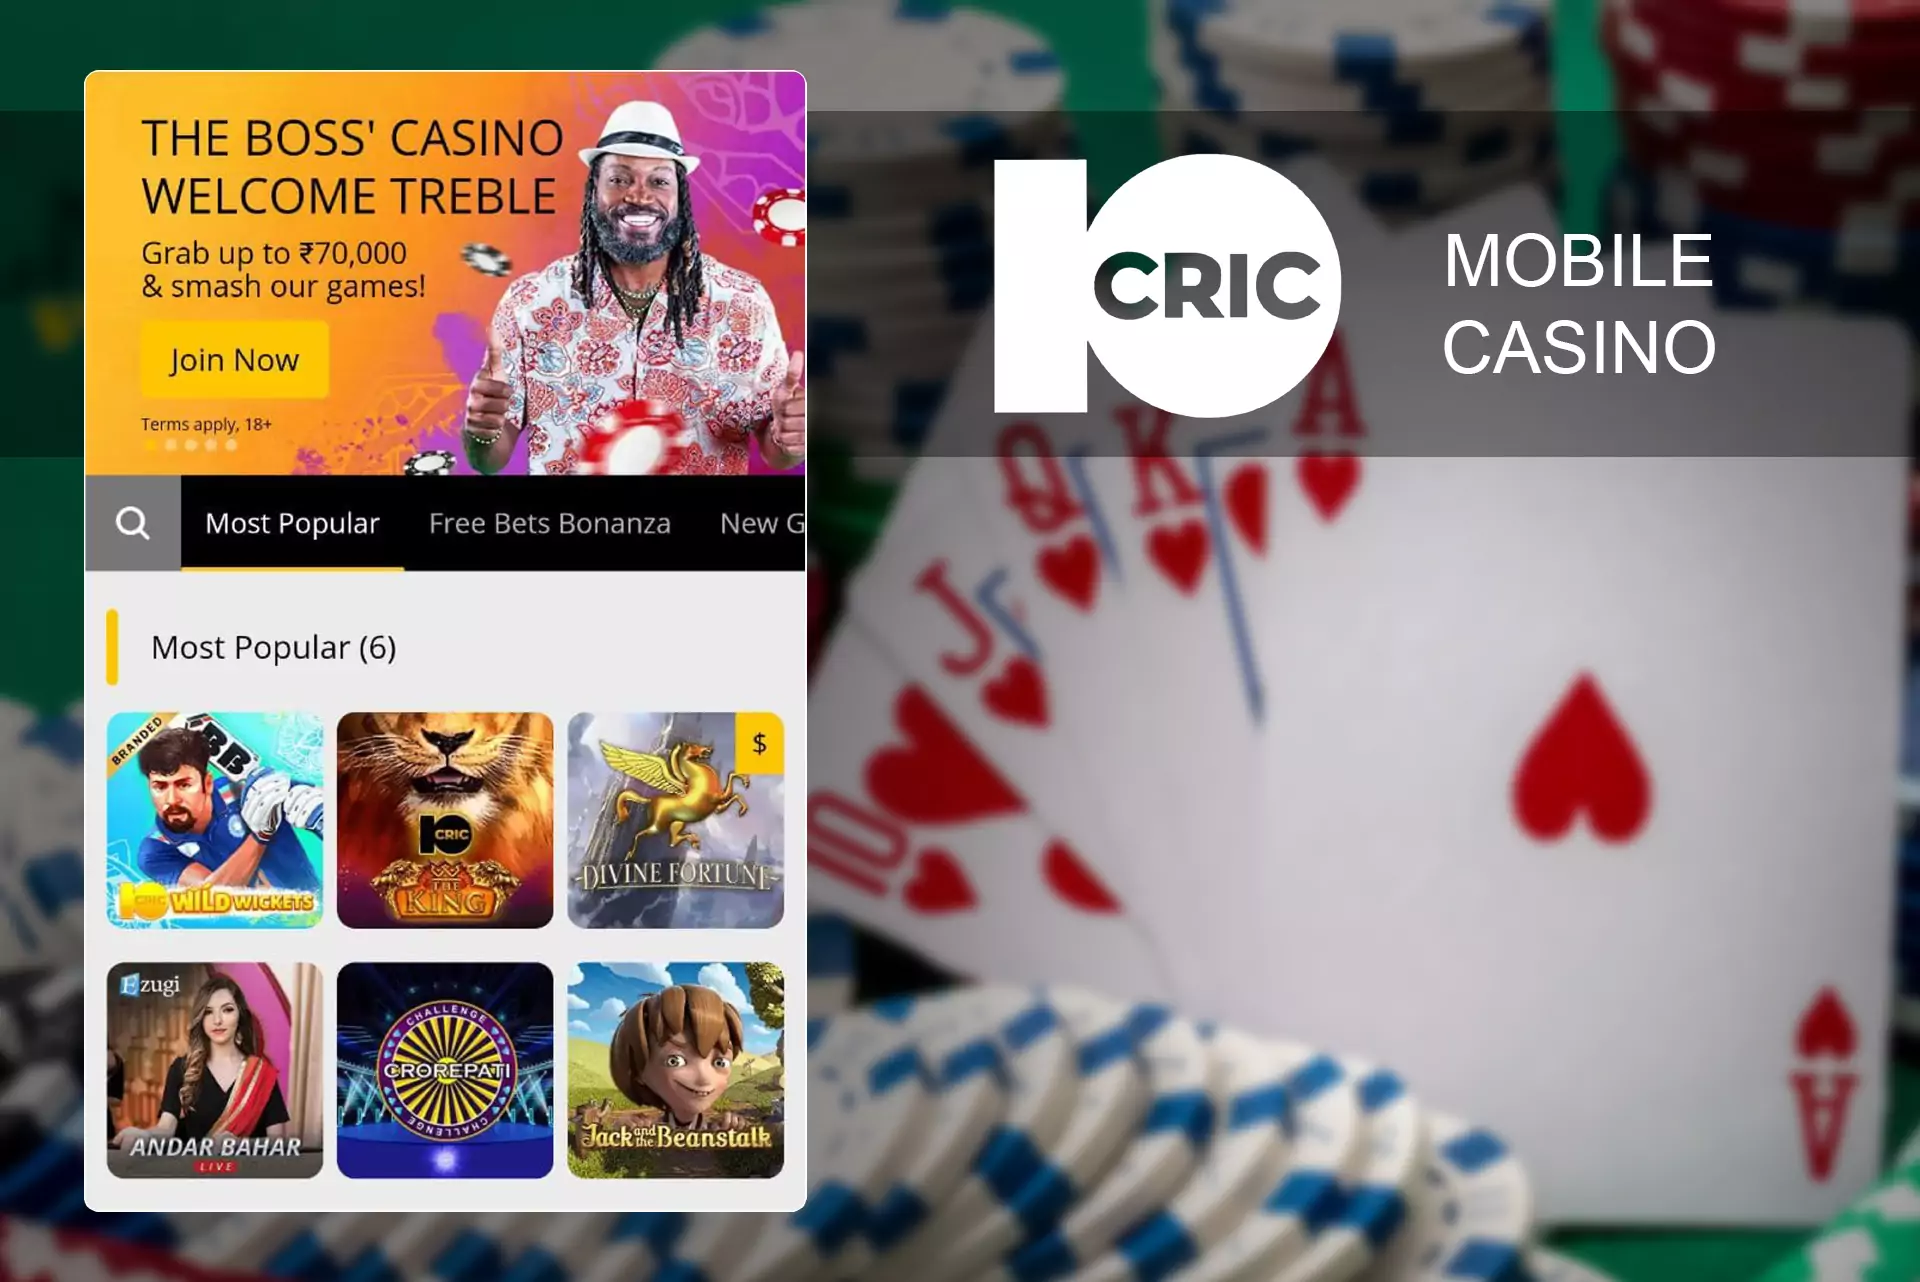 Casino fans can play table games and slots both in the app and mobile site.